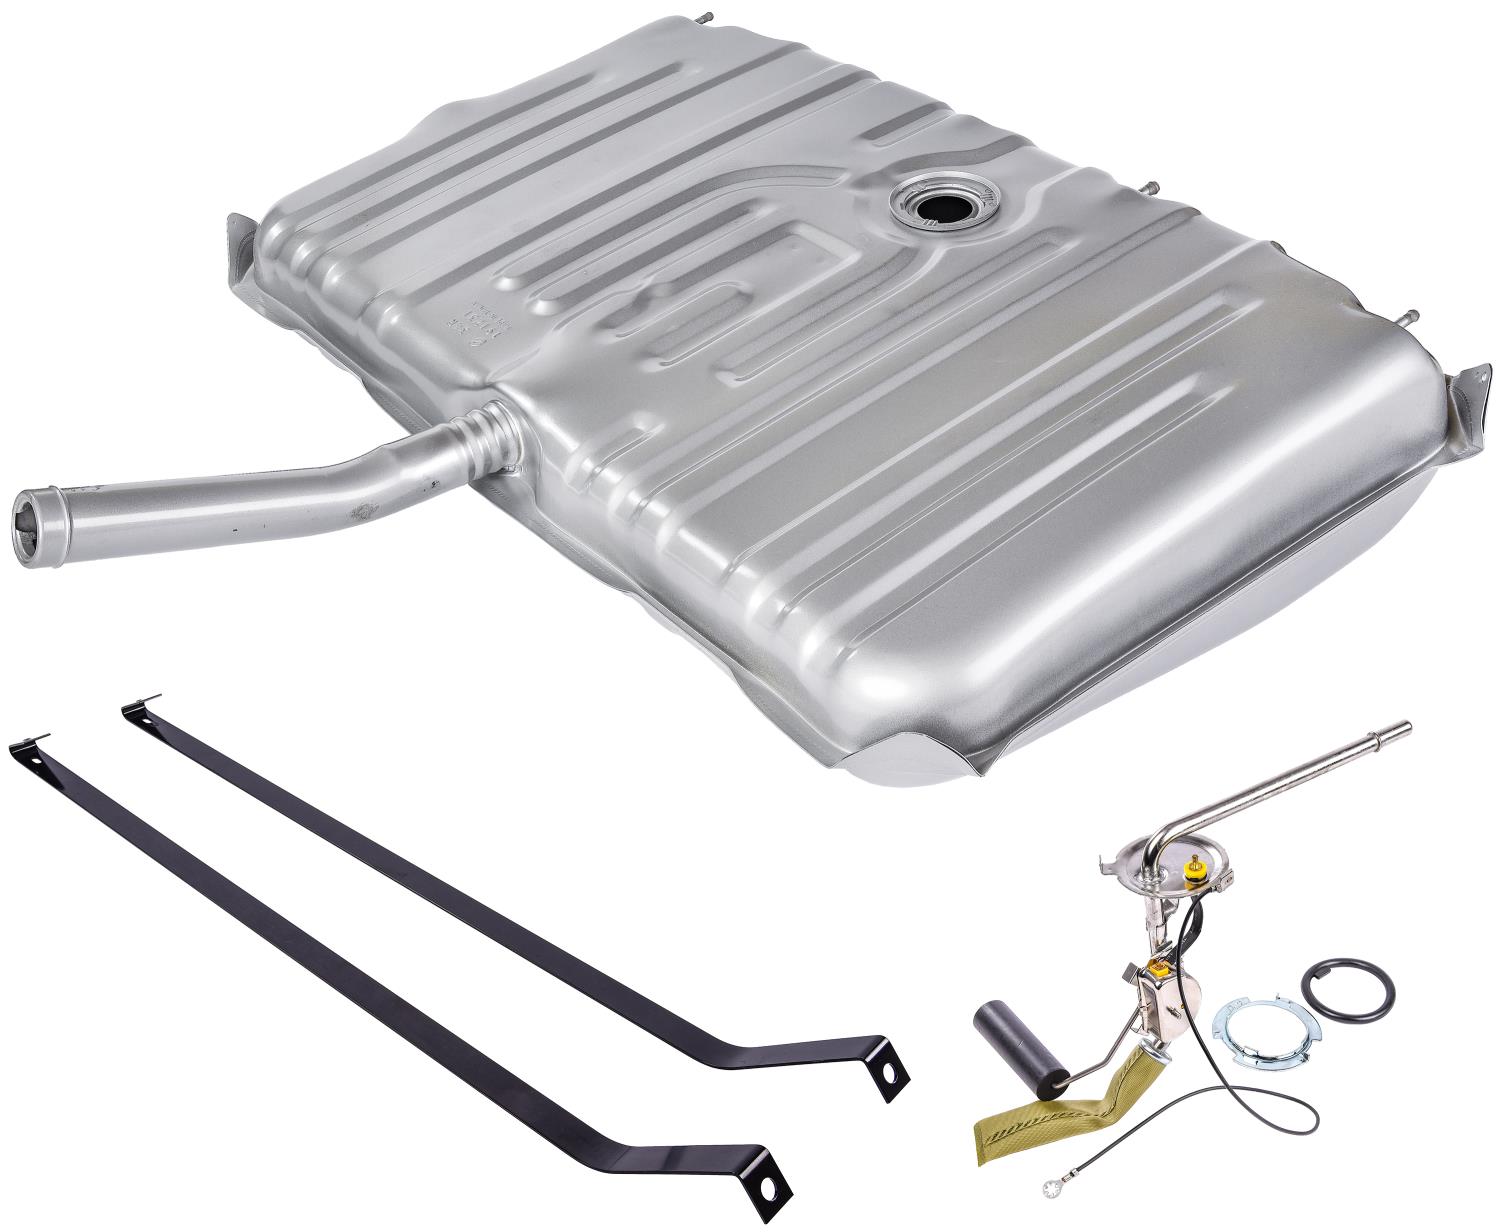 Fuel Tank Kit with Straps & Sending Unit for 1970-1972 Cutlass and 442 [20-Gallon]